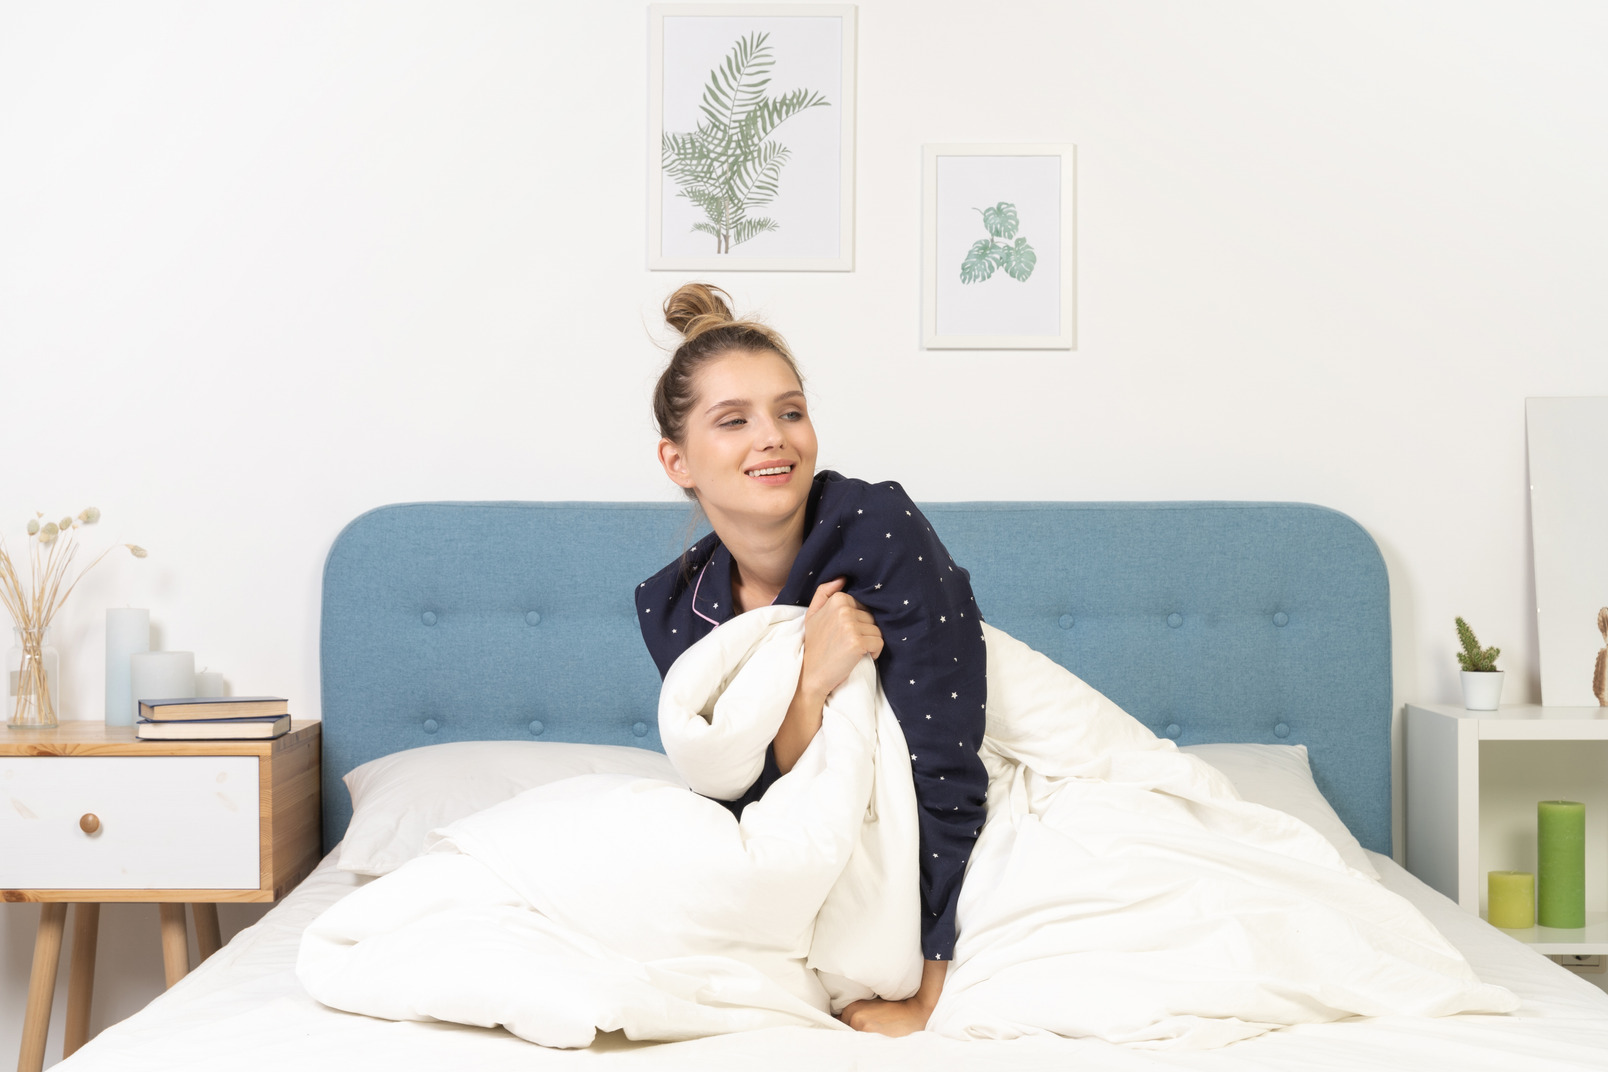 Front view of a smiling young woman in pajamas with blanket staying in bed